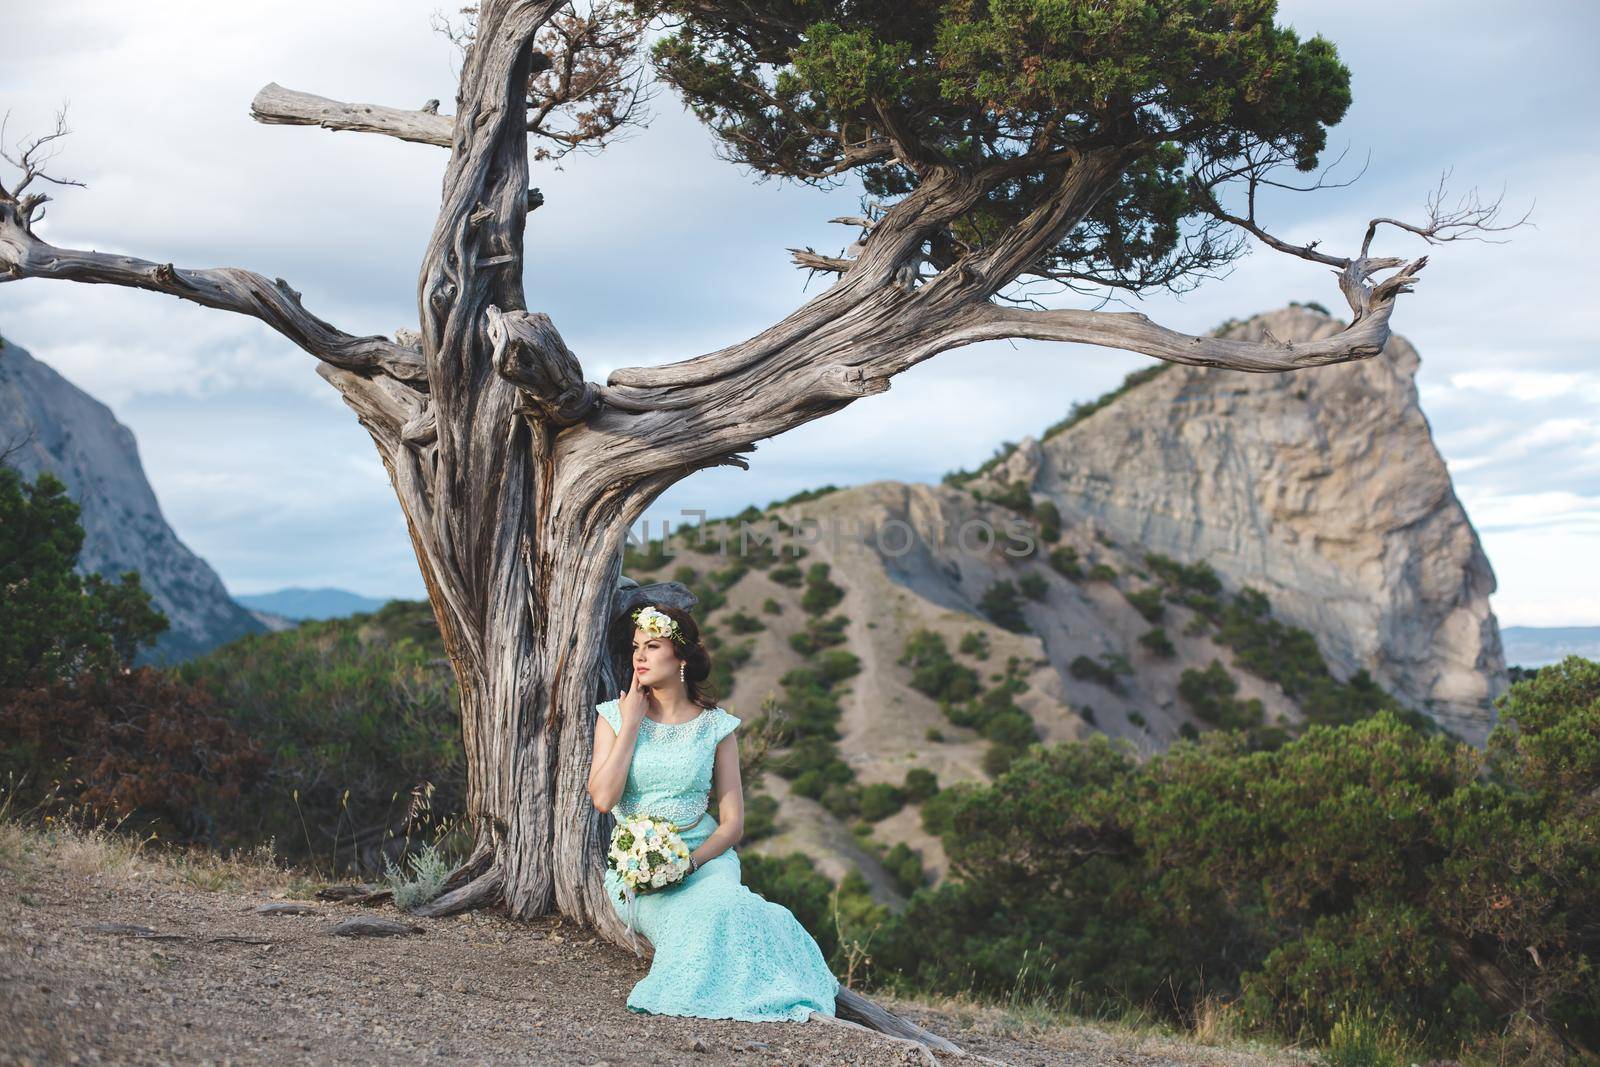 The bride and groom on nature in the mountains near the water. Suit and dress color Tiffany. The bride sits under a tree.